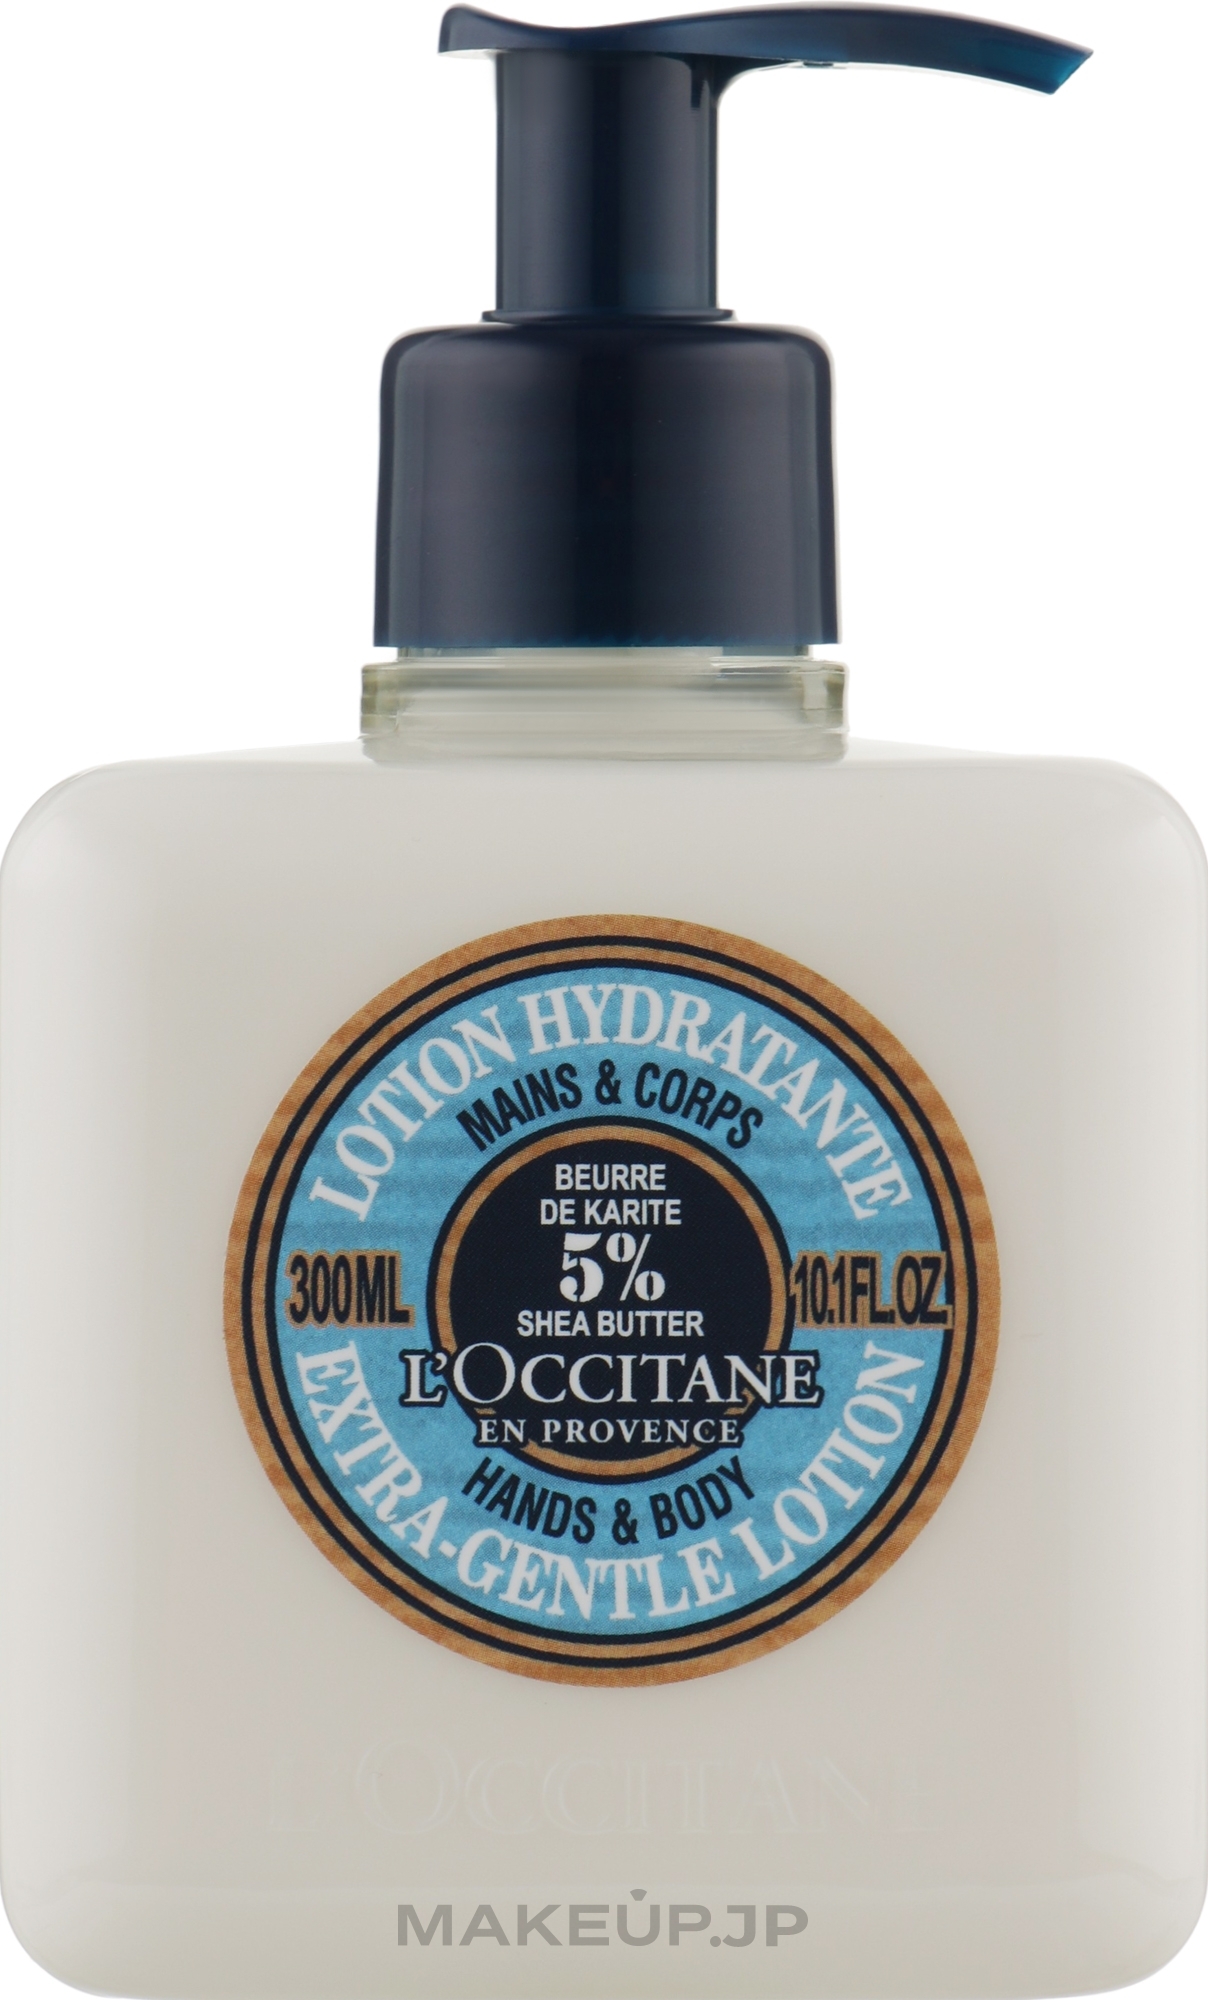 Hand & Body Moisturising Lotion "Shea" - L'occitane Shea Butter Extra-Gentle Lotion for Hands & Body — photo 300 ml